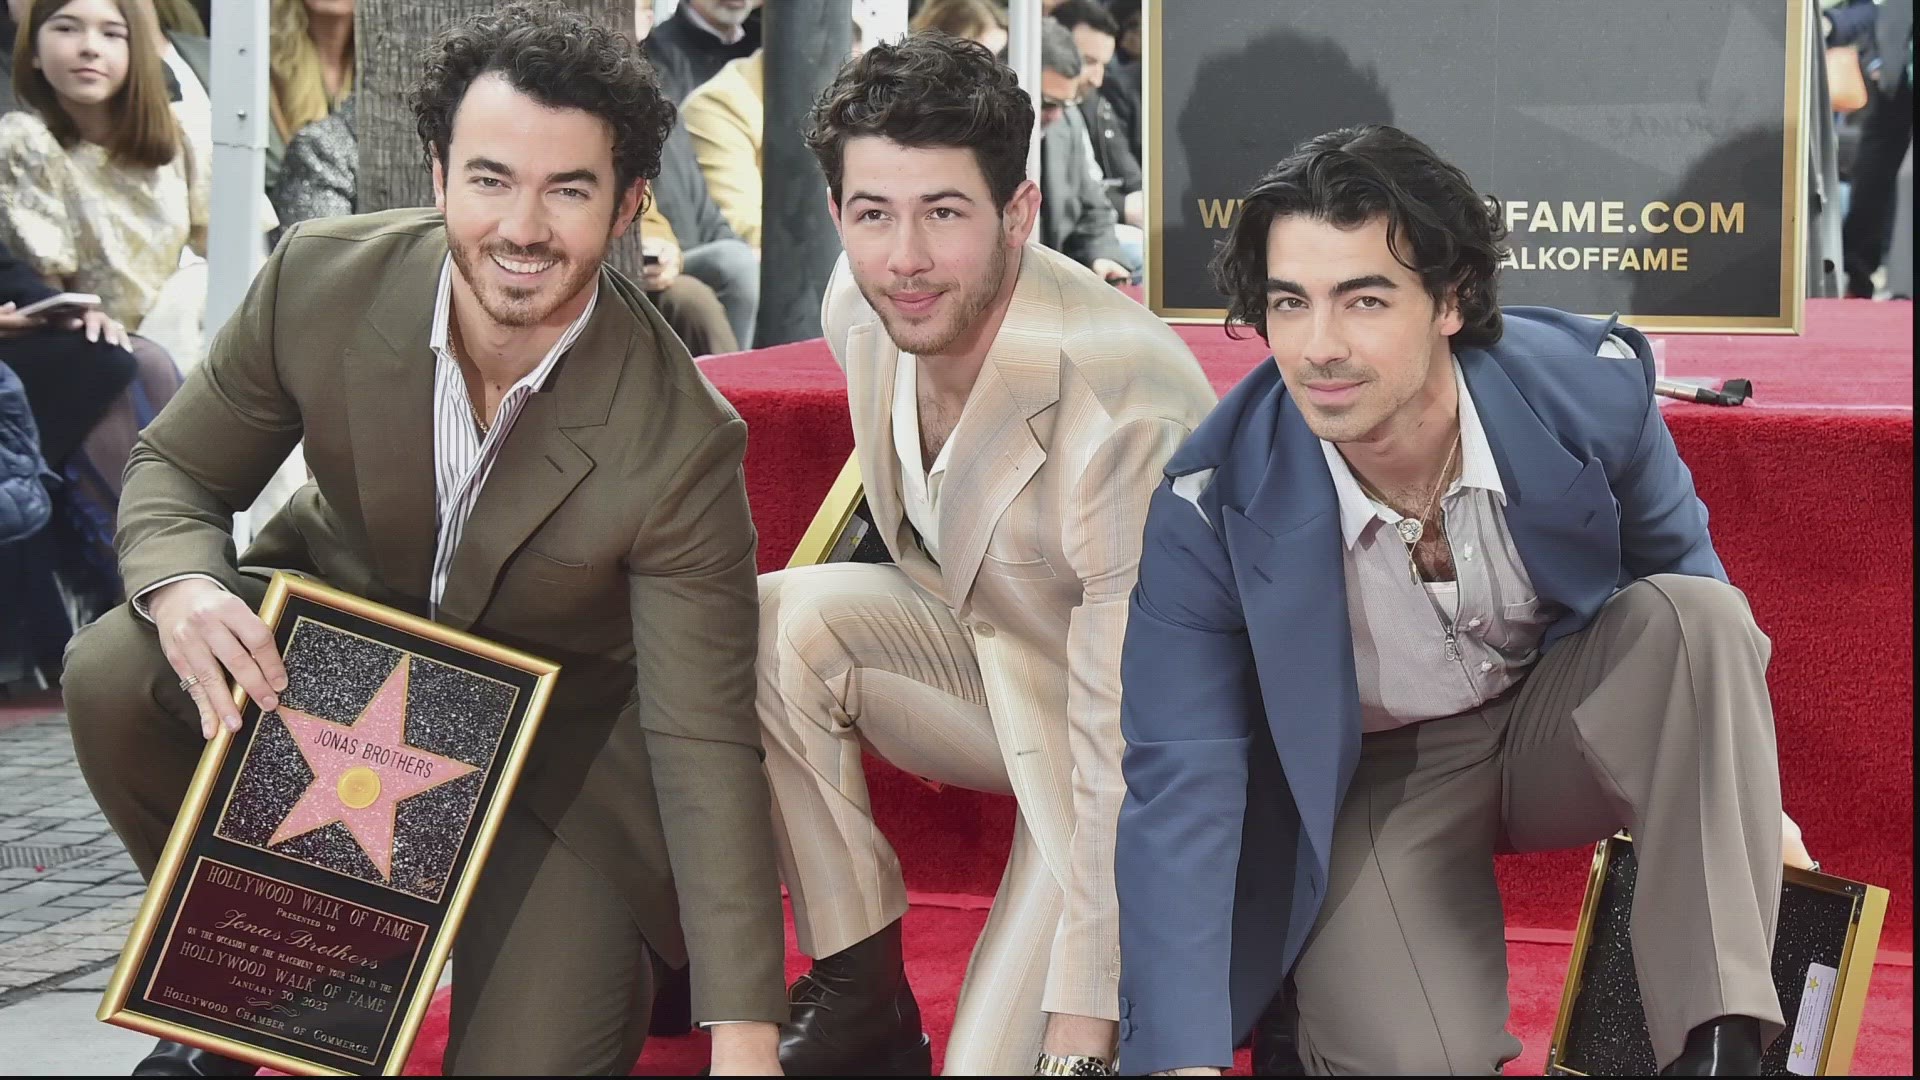 The Jonas Brothers are bringing their concert tour to Capitol One Arena on Sept. 23.